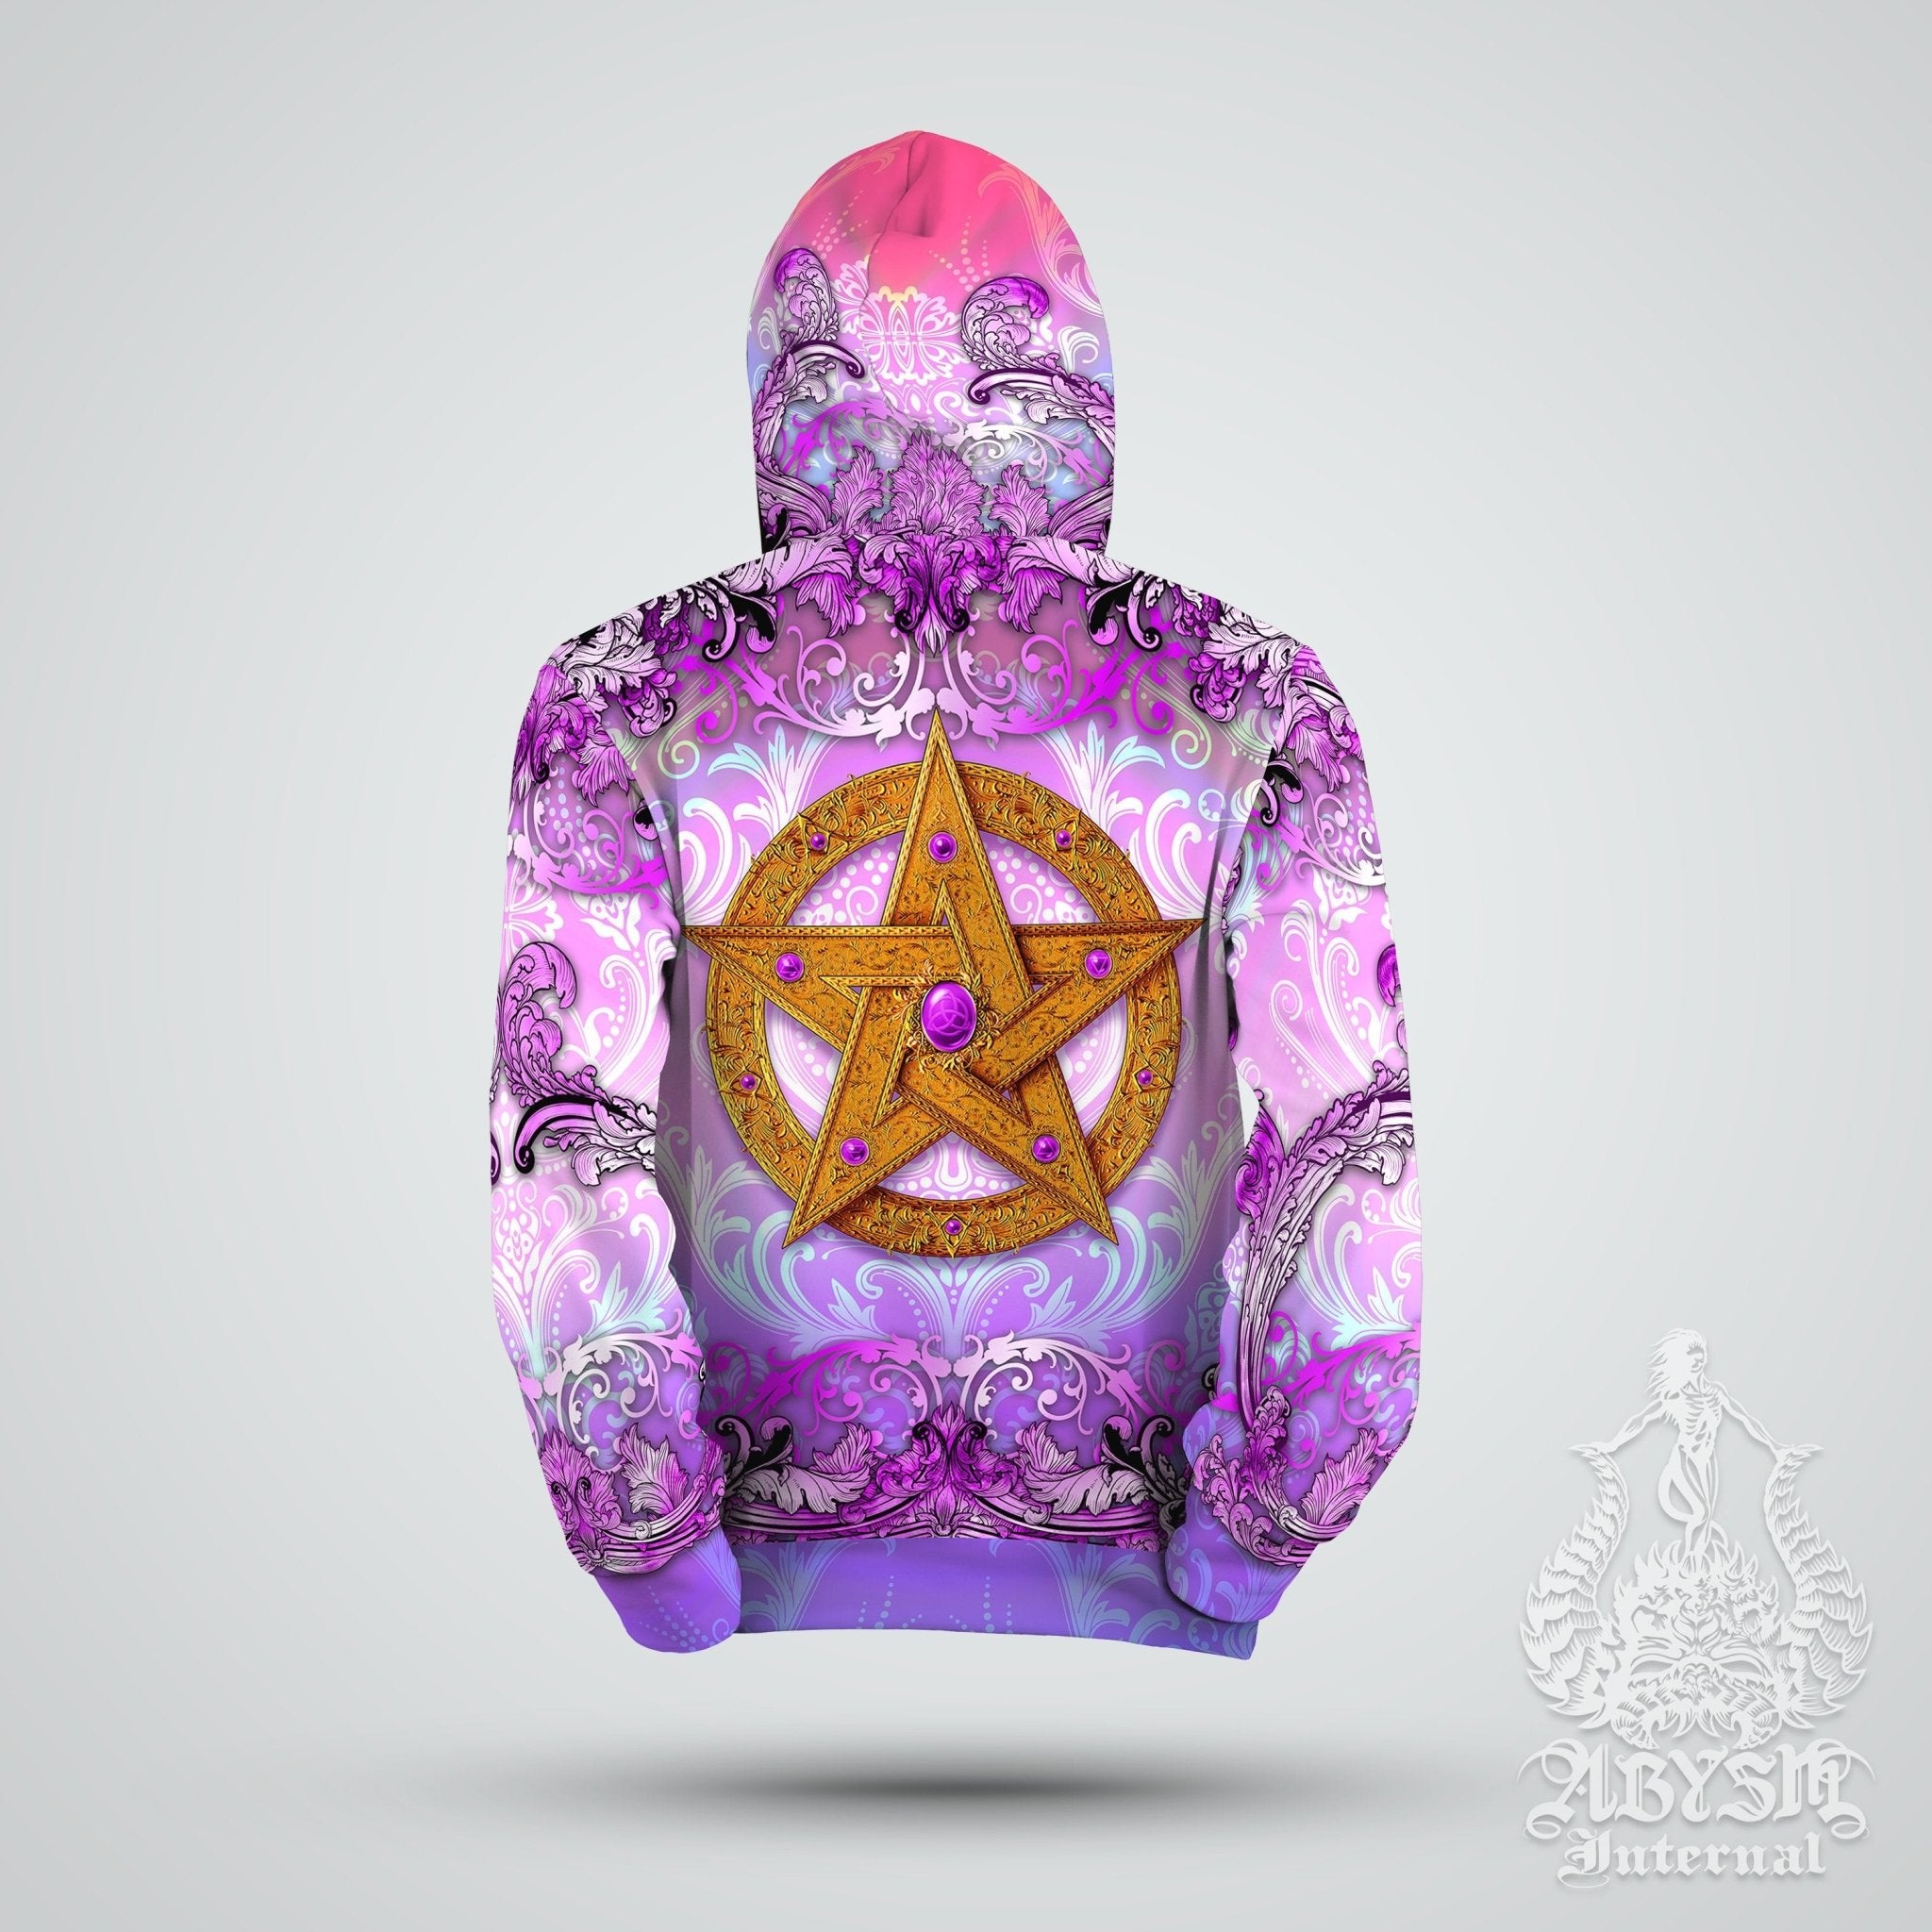 Witchy Hoodie, Pagan Outfit, Wiccan Streetwear, Witch Sweater, Alternative Clothing, Unisex - Pentacle, Purple - Abysm Internal